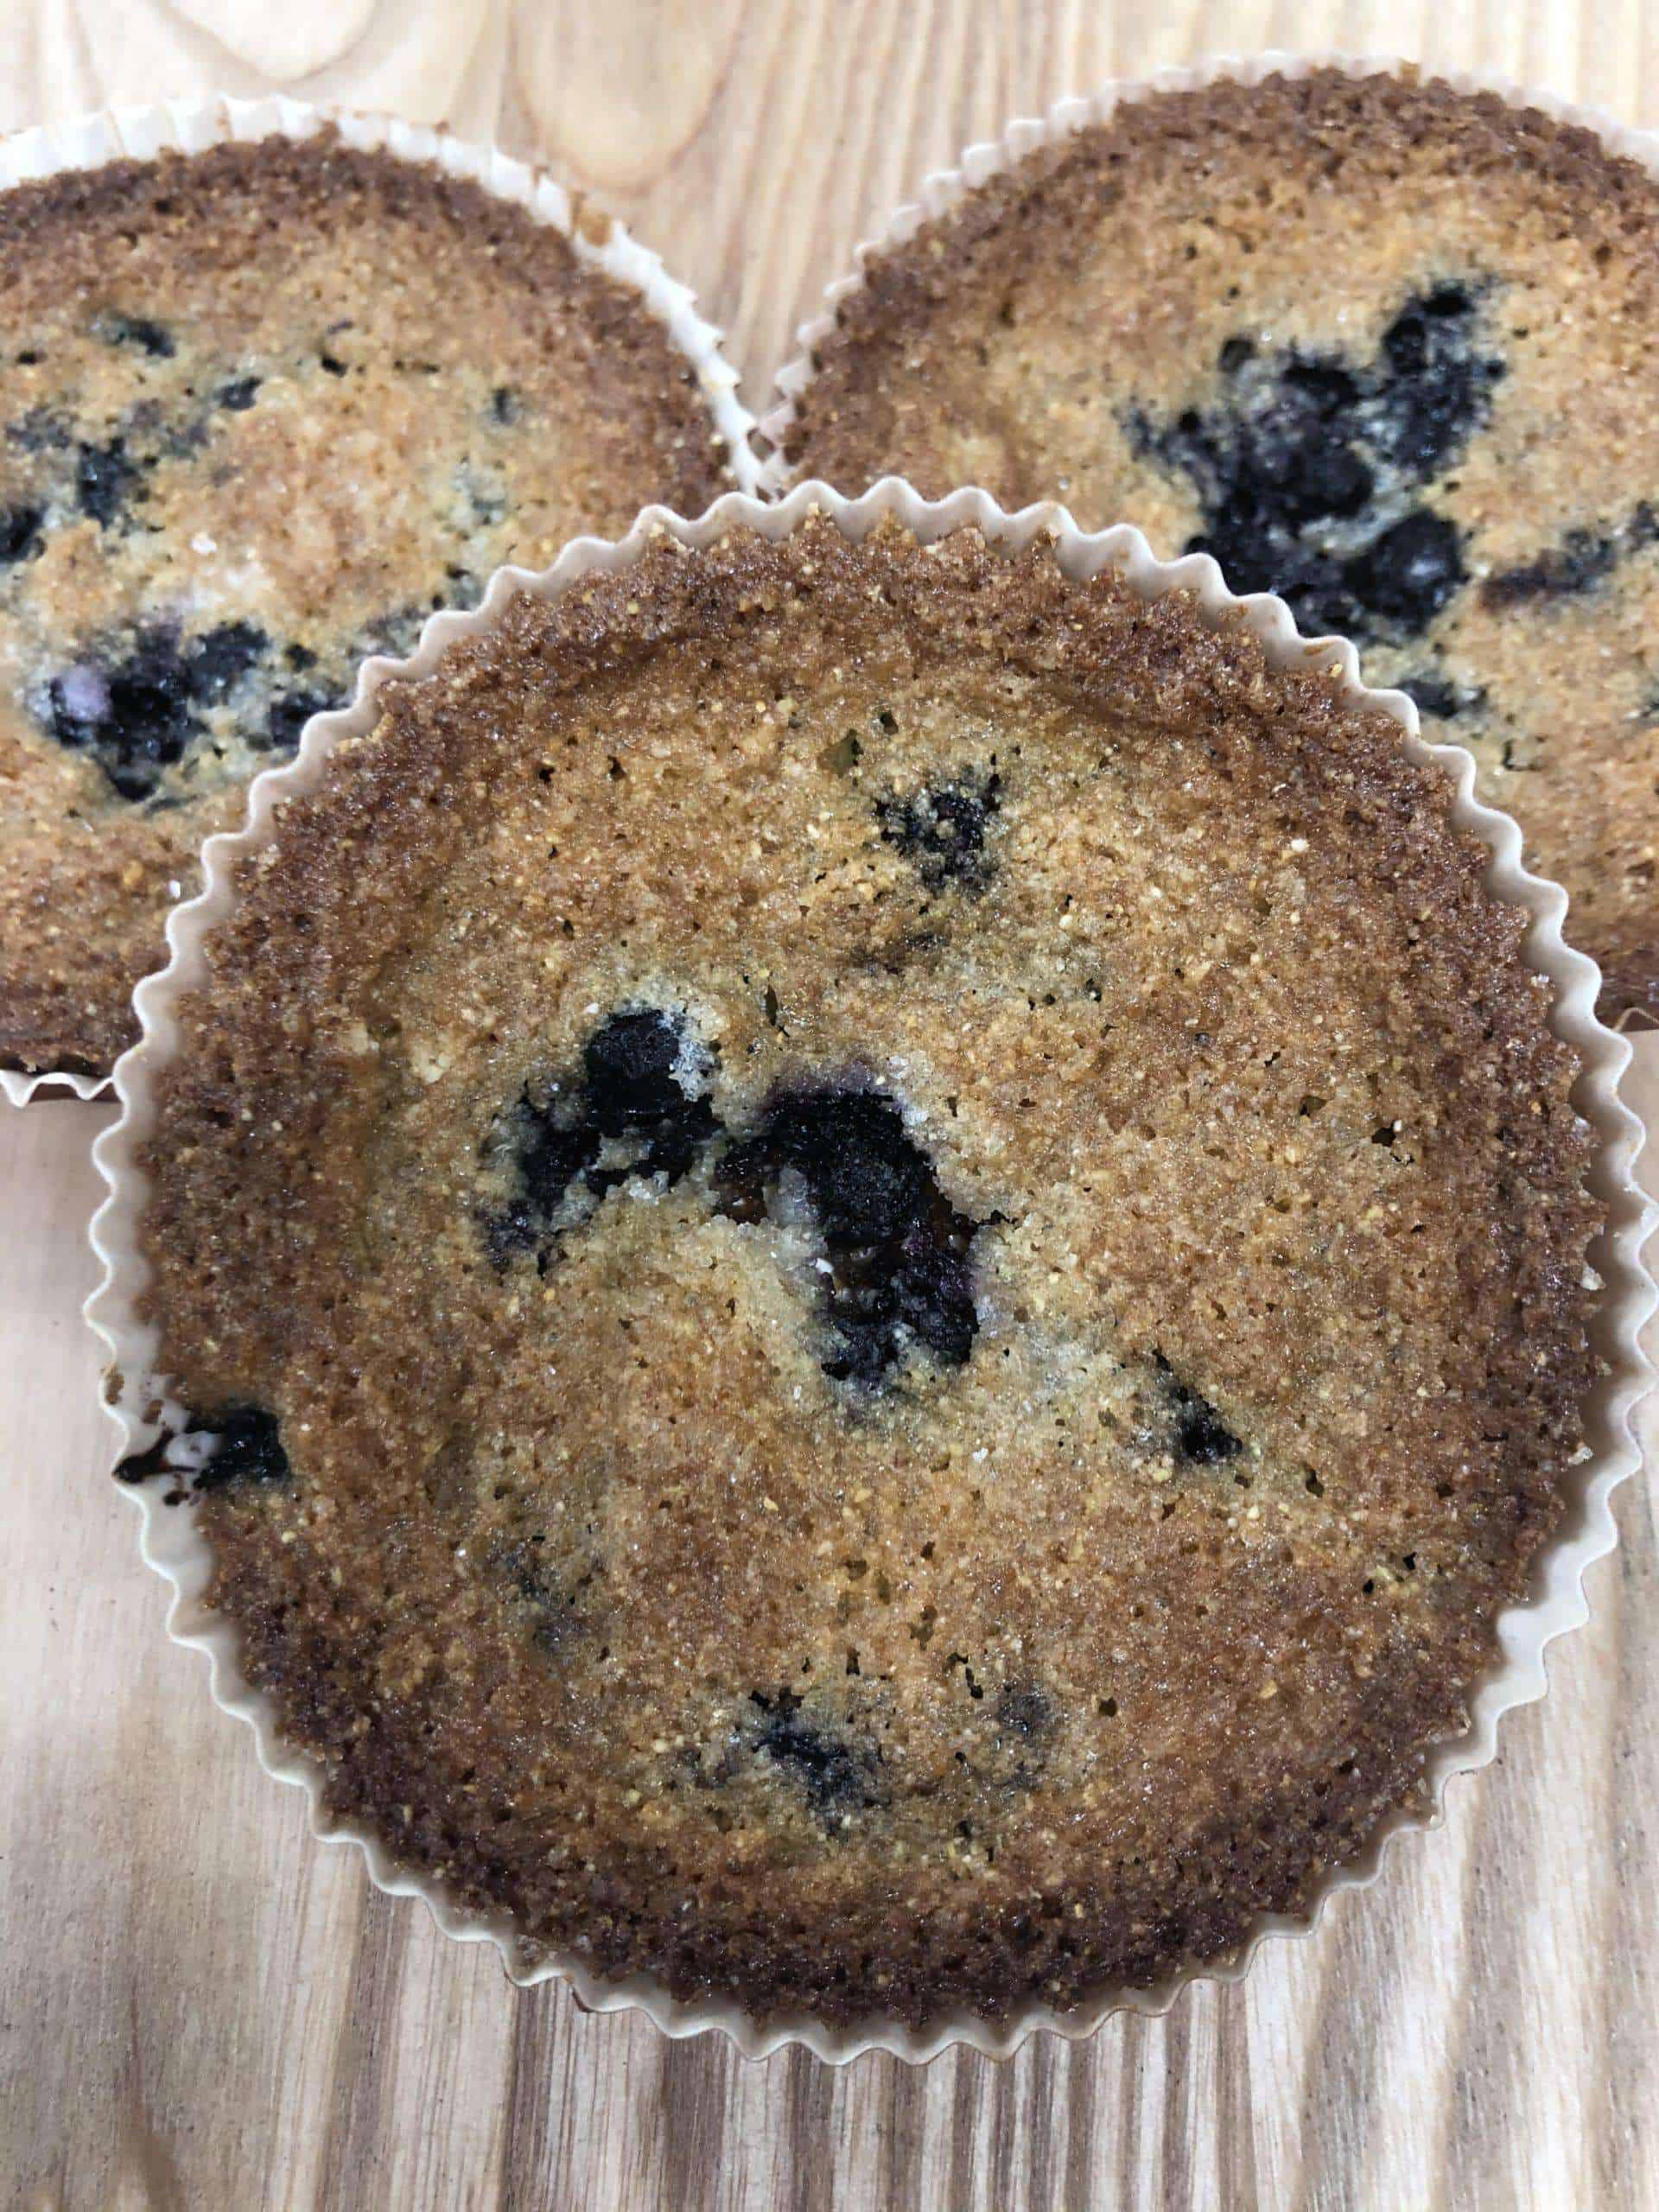 Corn cake with blueberries